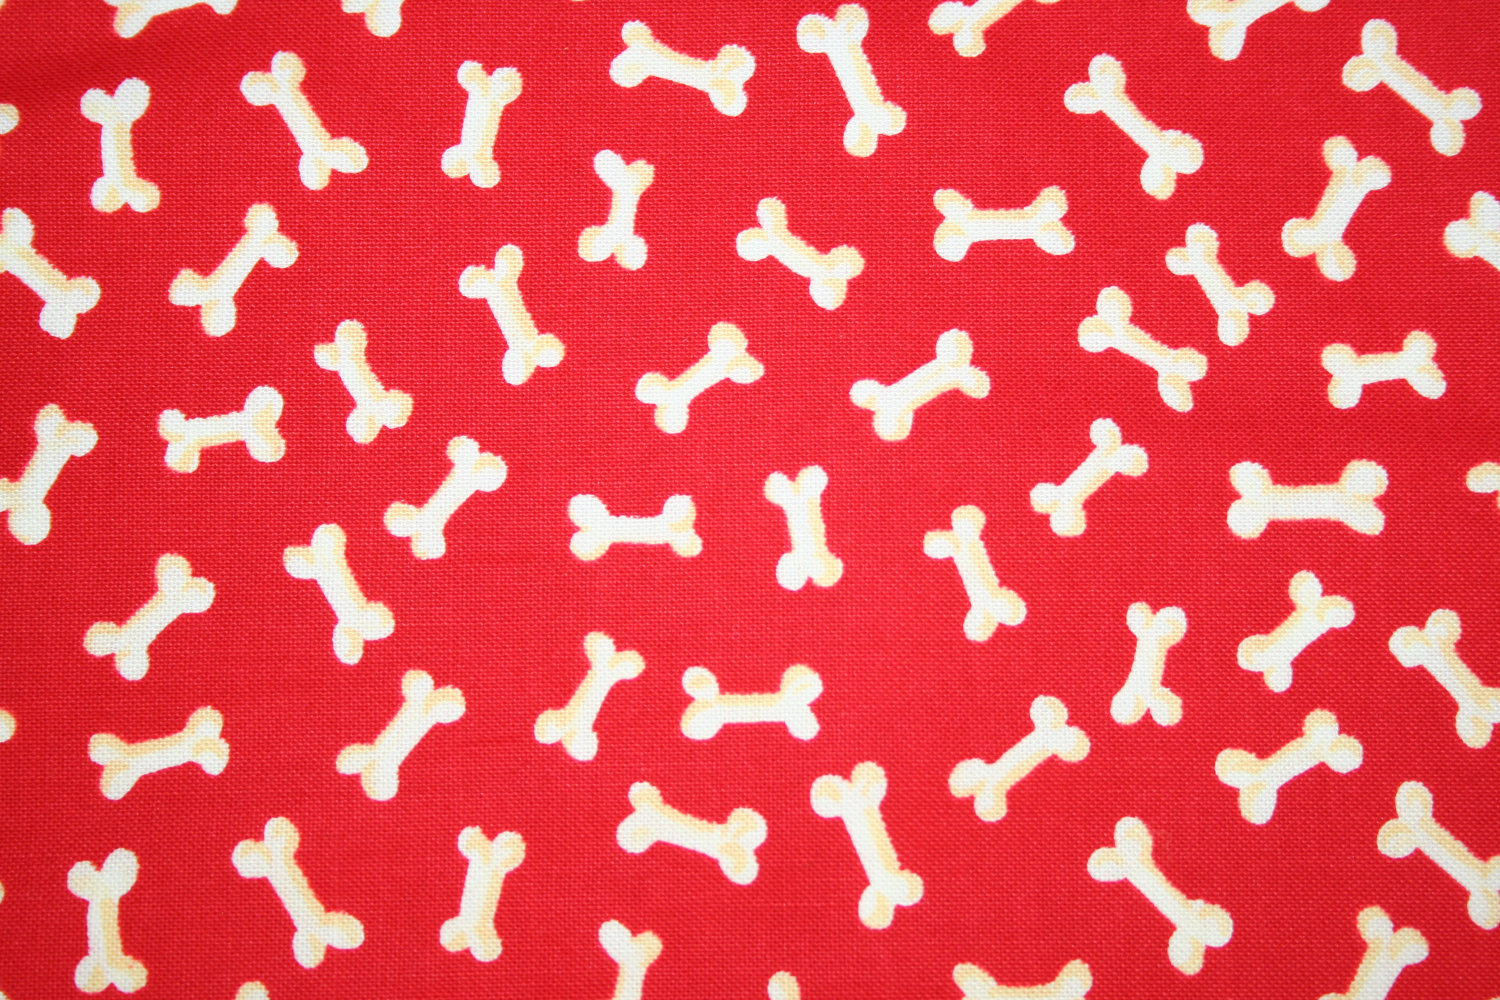 Yard White Dog Bones On Red Cute Fabric By Shannonksykes